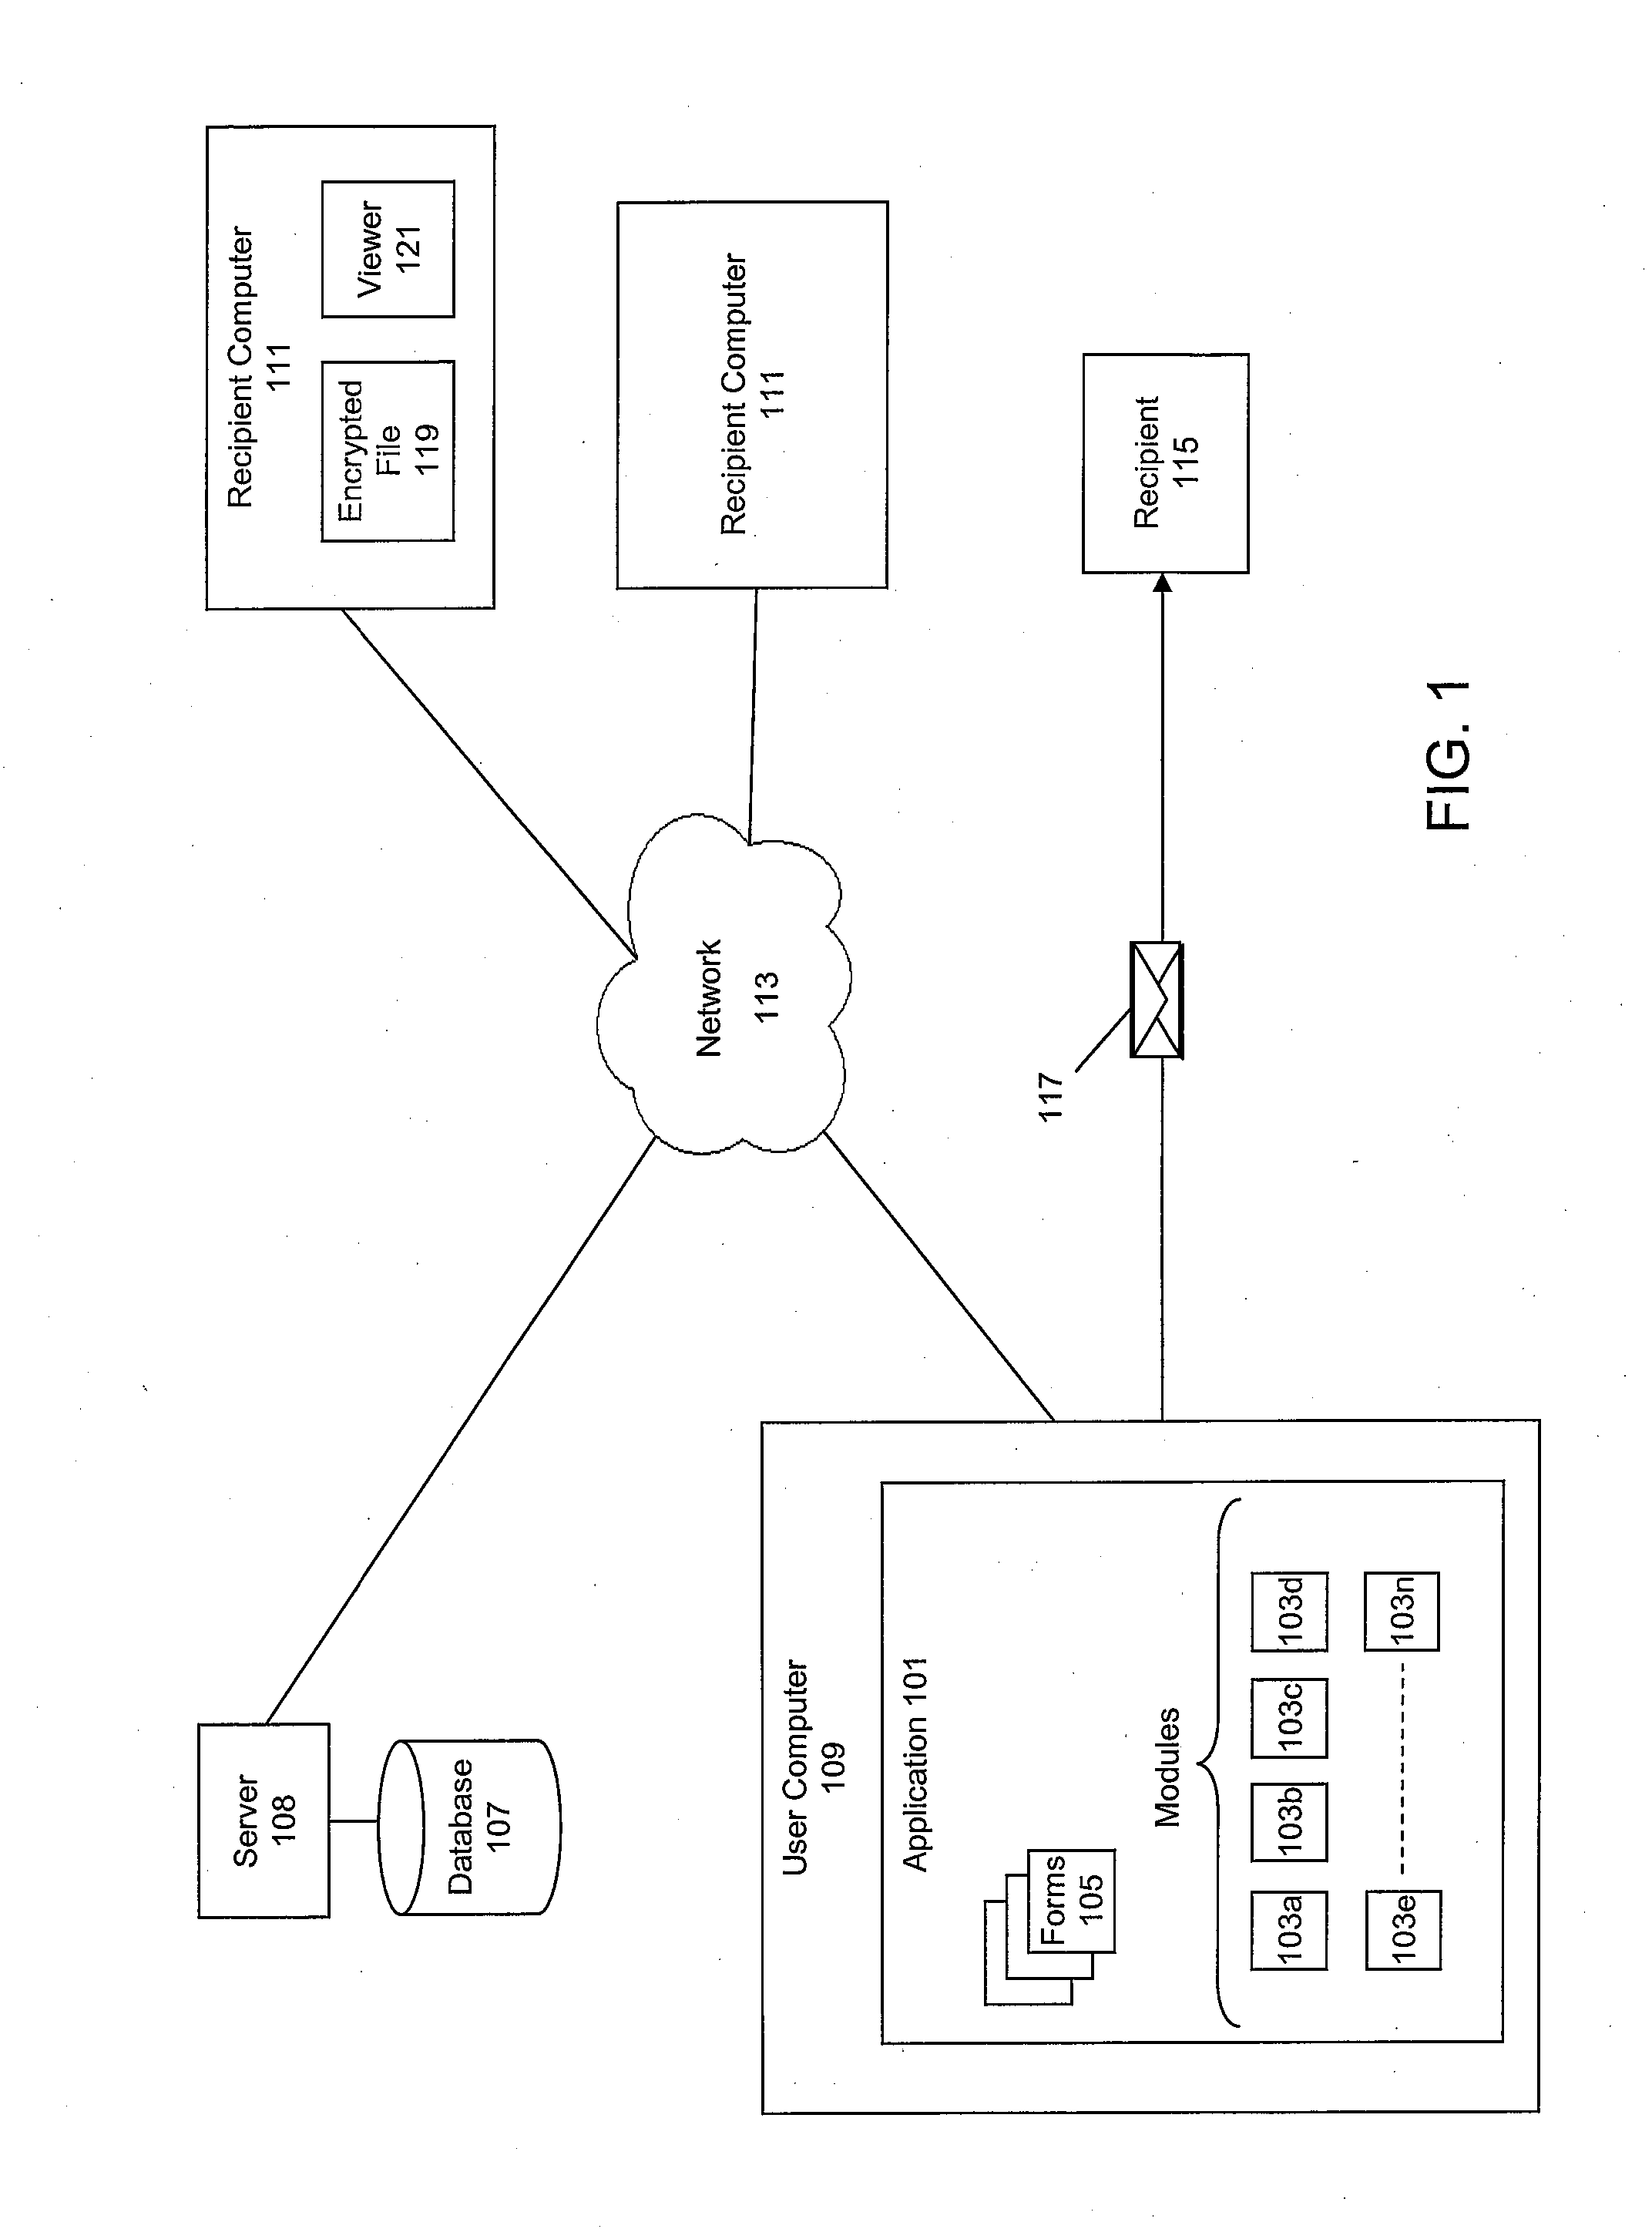 Computer-implemented system and method for aggregating and selectively distributing critical personal information to one or more user-designated recipients